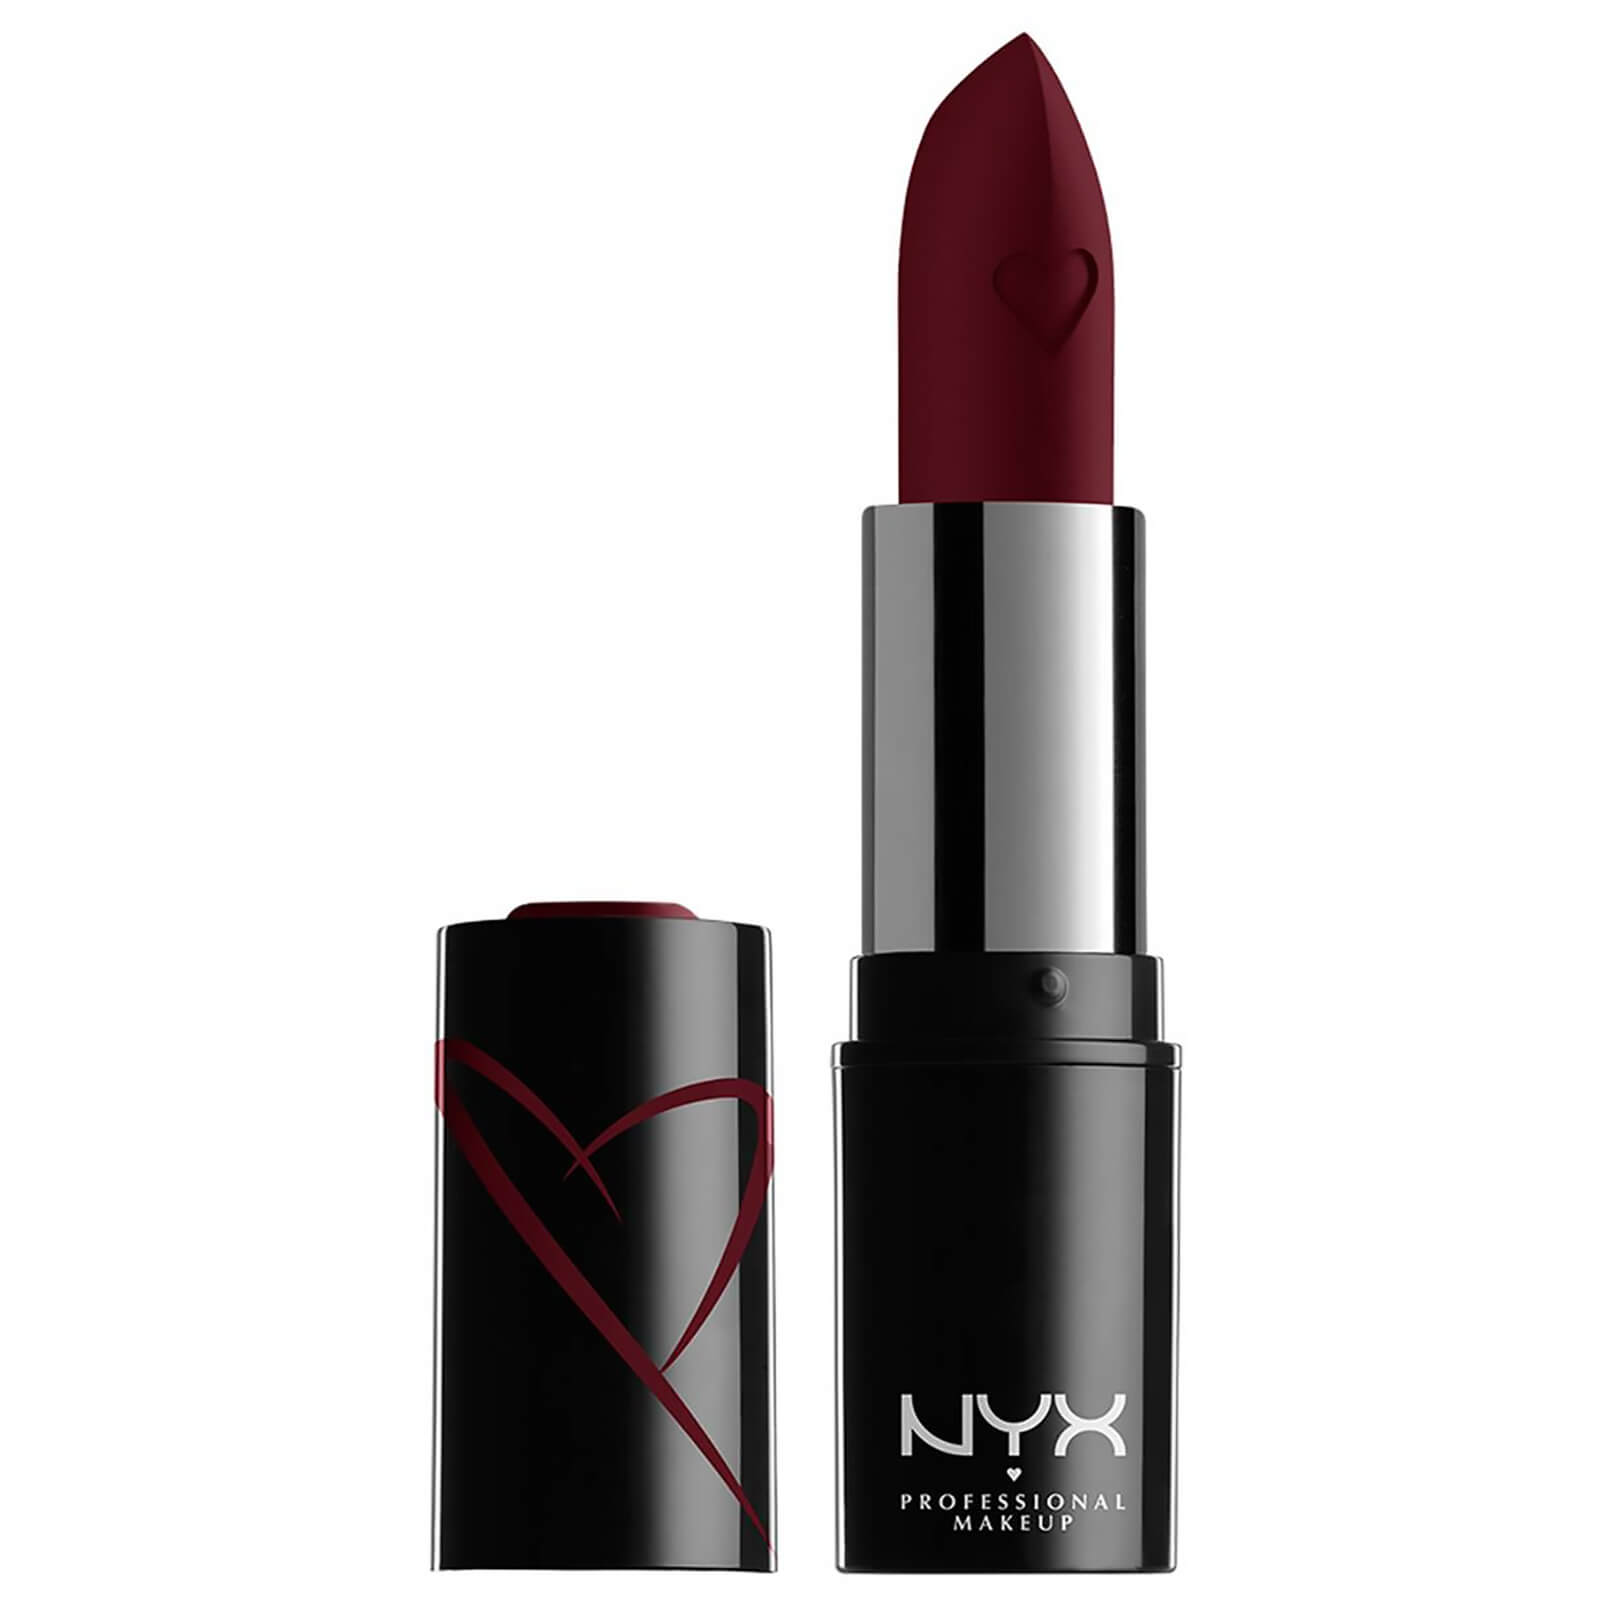 NYX Professional Makeup Shout Loud Hydrating Satin Lipstick (Various Shades) - Opinionated